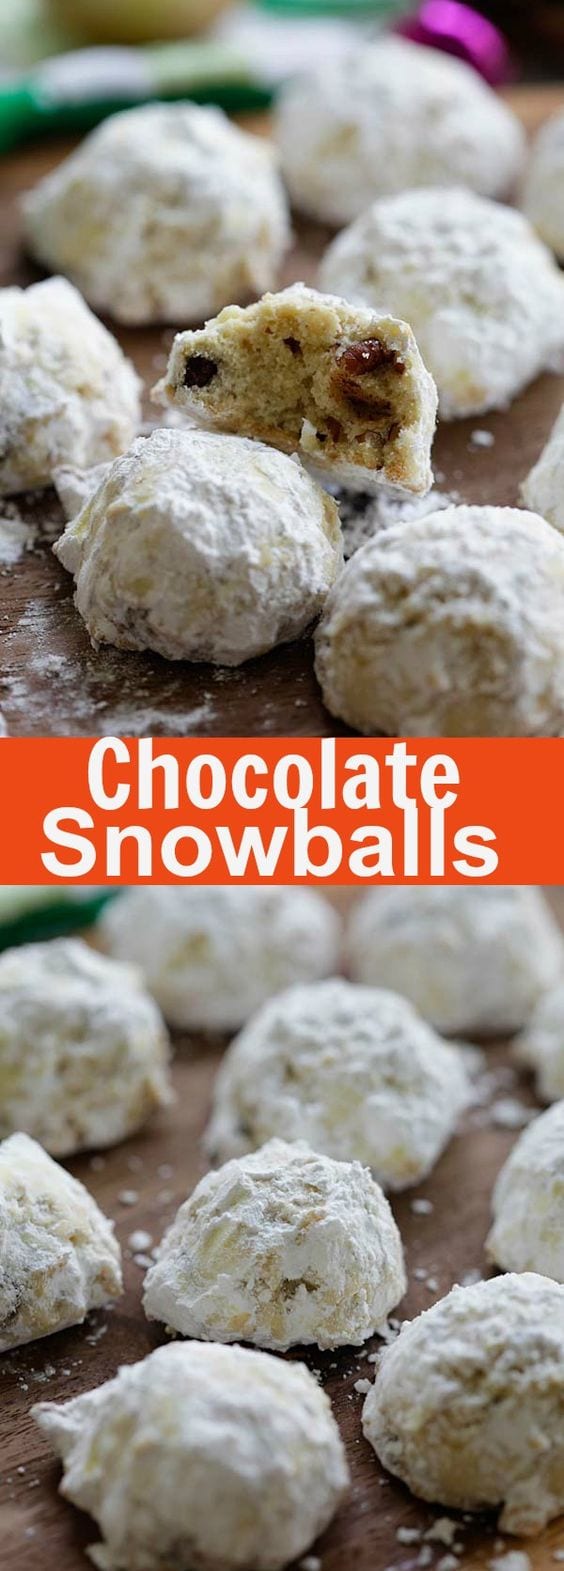 Chocolate Snowballs – Sugar-covered chocolate chips and pecan cookies. Buttery, crunchy, sweet, the best cookies for the season | rasamalaysia.com